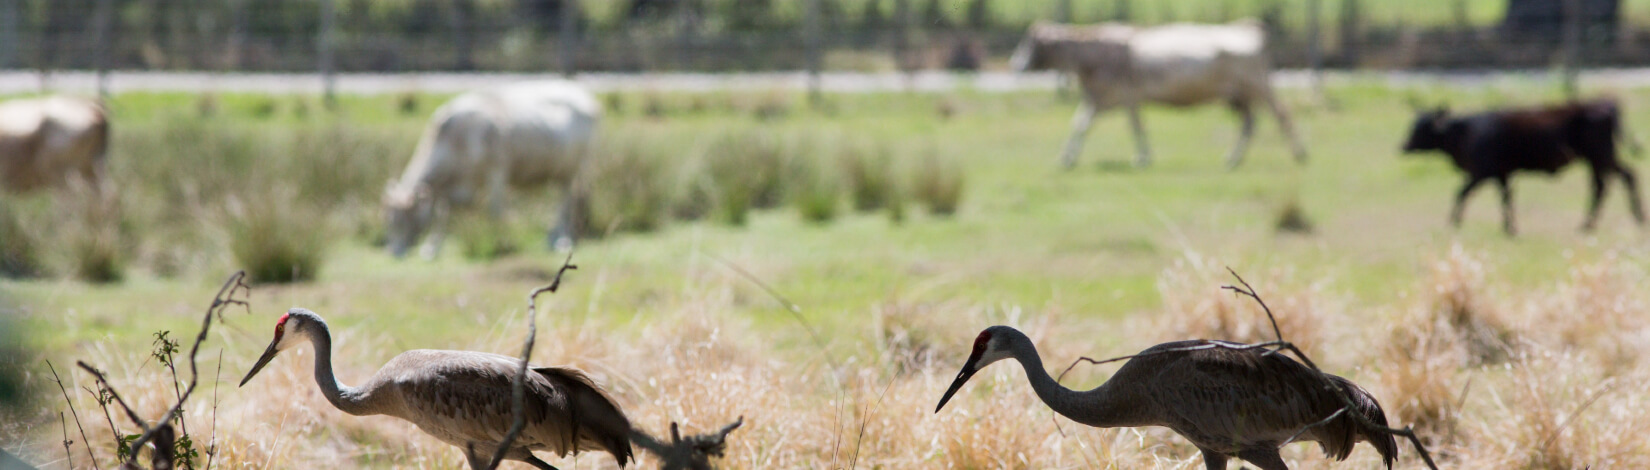 A pair of sandhill cranes walking in a cow pasture at the RCREC